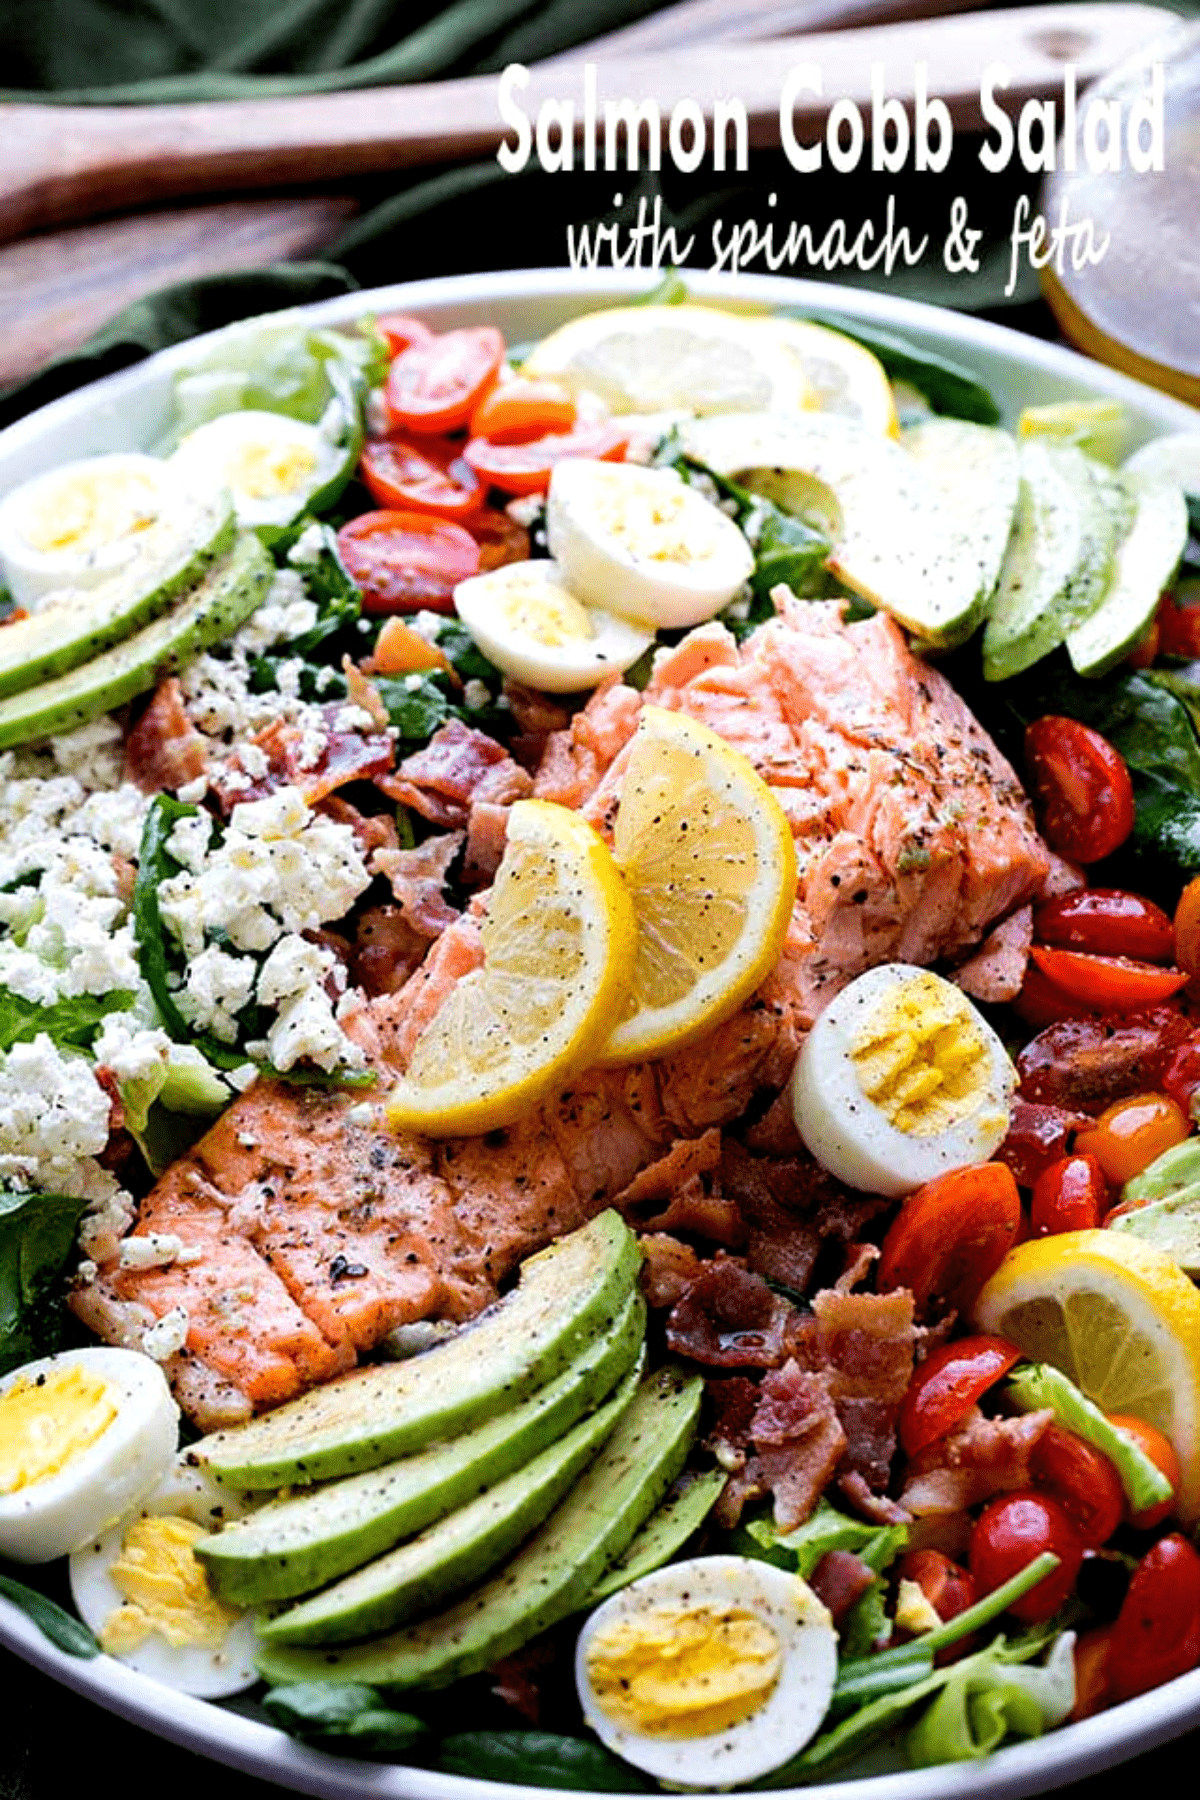 Salmon Cobb Salad with Spinach and Feta - Tender spinach and romaine lettuce topped with delicious oven-baked salmon, tomatoes, eggs, bacon, avocados and feta, all tossed together with a tangy lemon-mustard dressing.